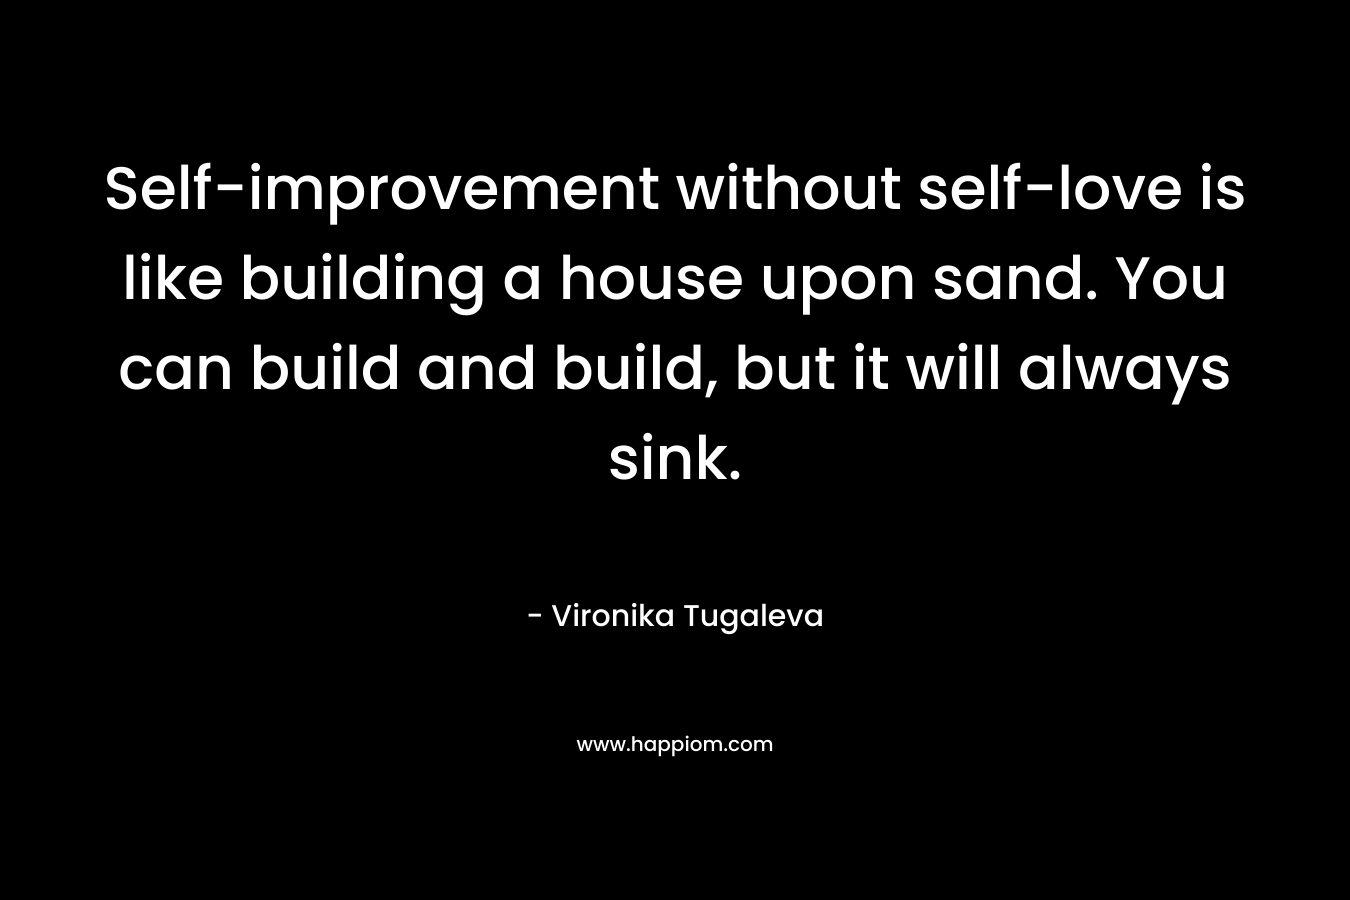 Self-improvement without self-love is like building a house upon sand. You can build and build, but it will always sink.